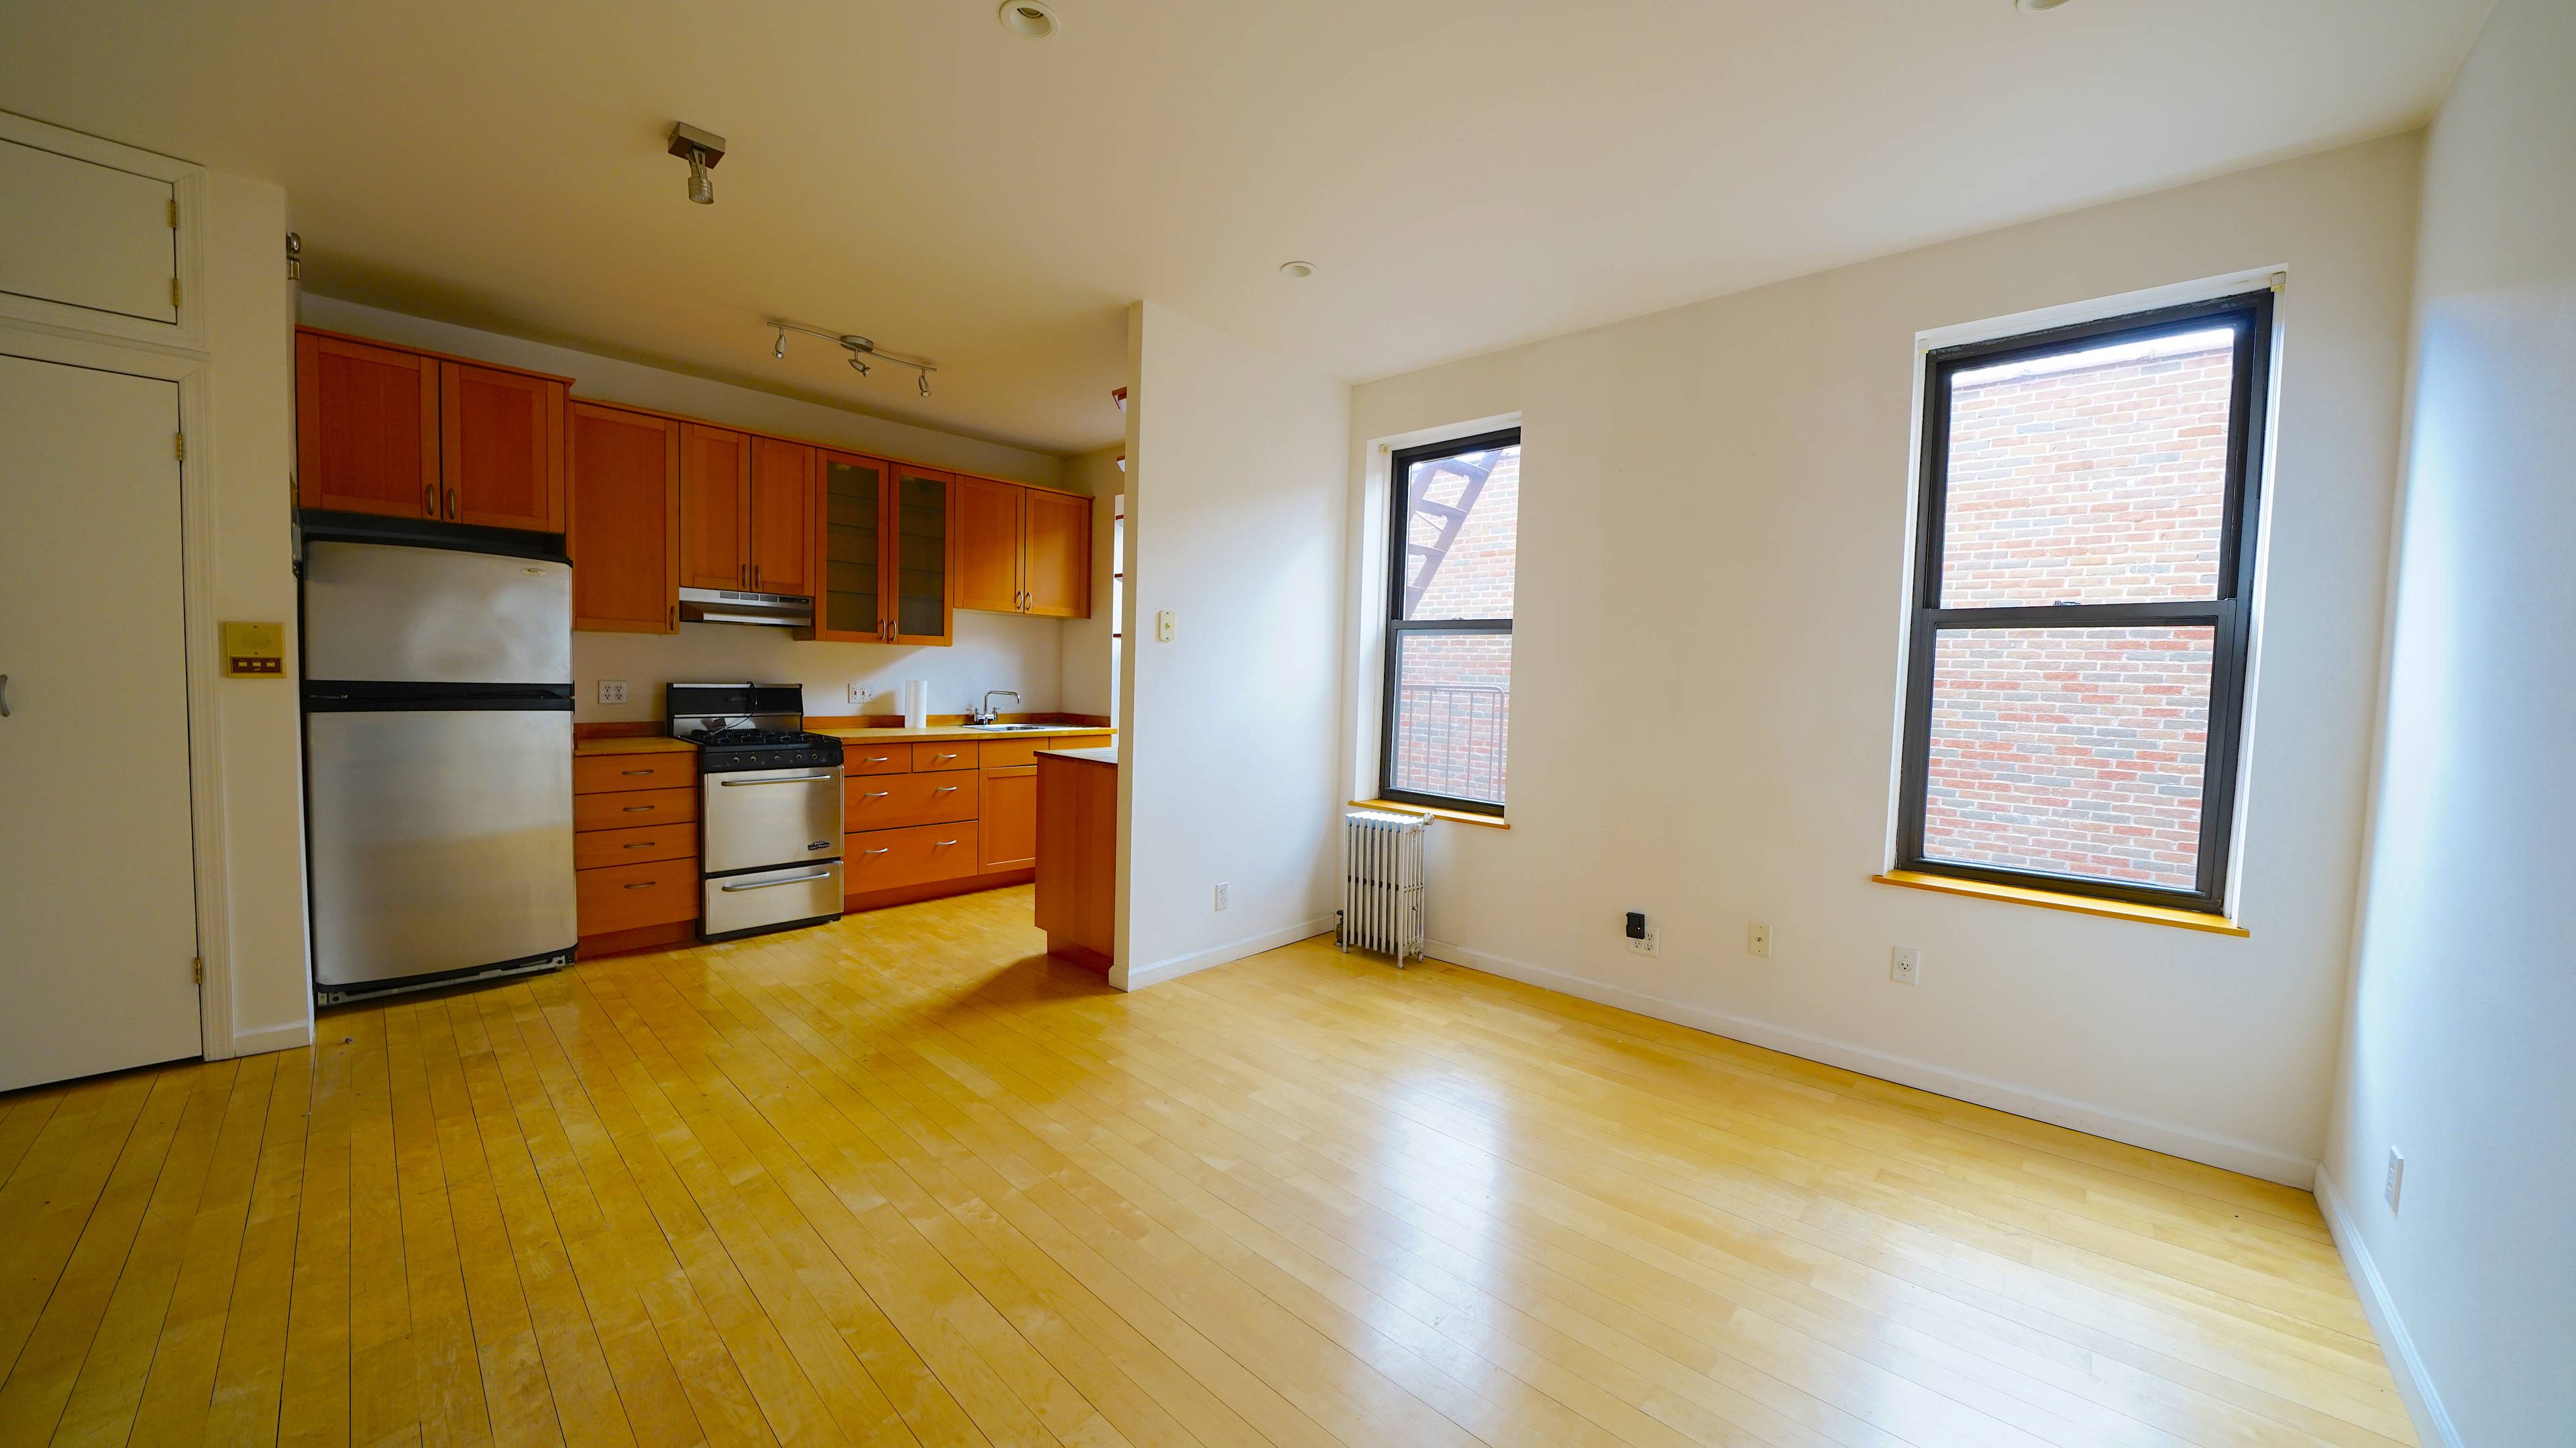 NO FEE ! Windsor terrace bright and spacious renovated one bedroom, located on the 3rd floor of a meticulously maintained prewar building.